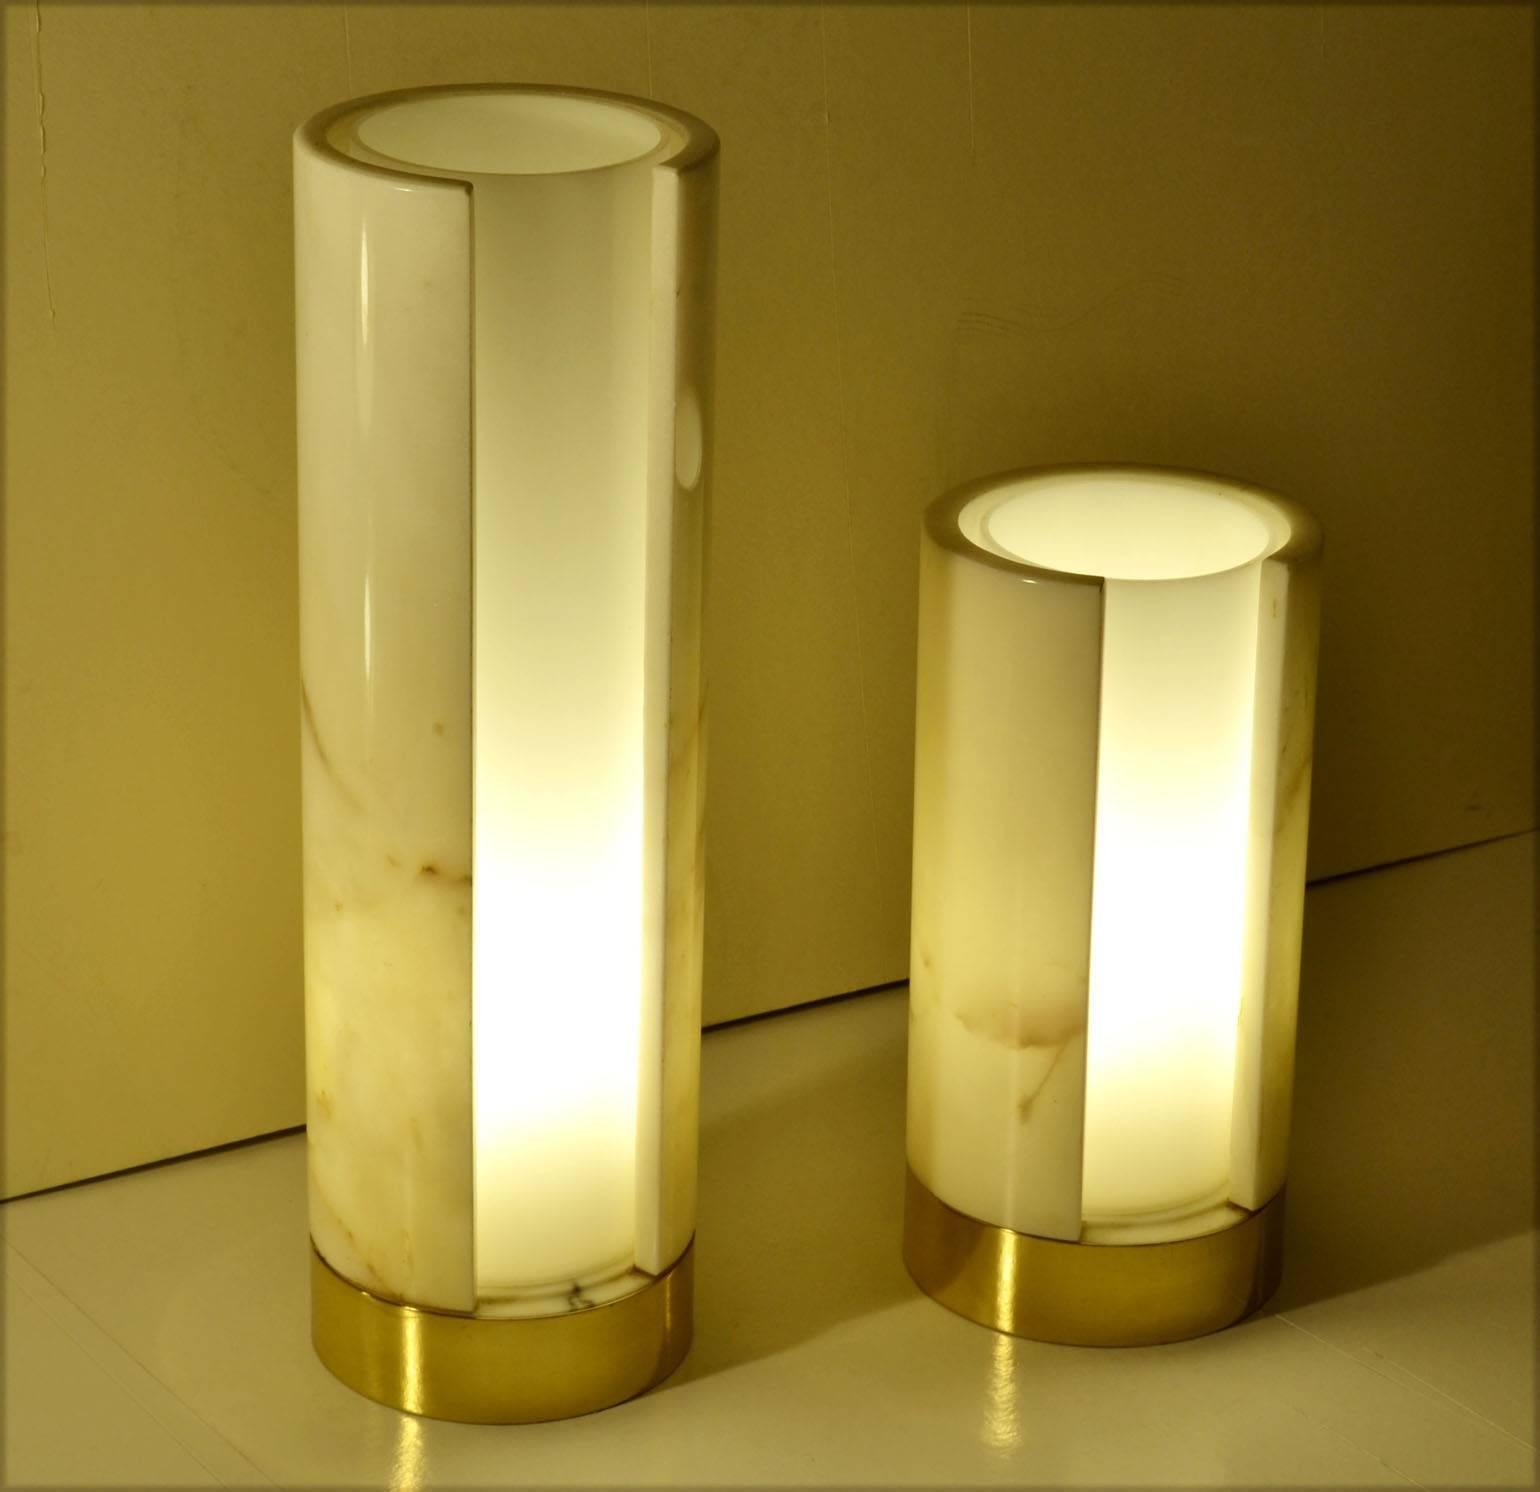 These minimal Carrara marble lamps have been carved to a thin wall which lets the light through and shows its veins. Inside a cylinder of plexiglas diffuses the light.
The two lamps have different heights 42 and 28 cm.
The diameter is the same for